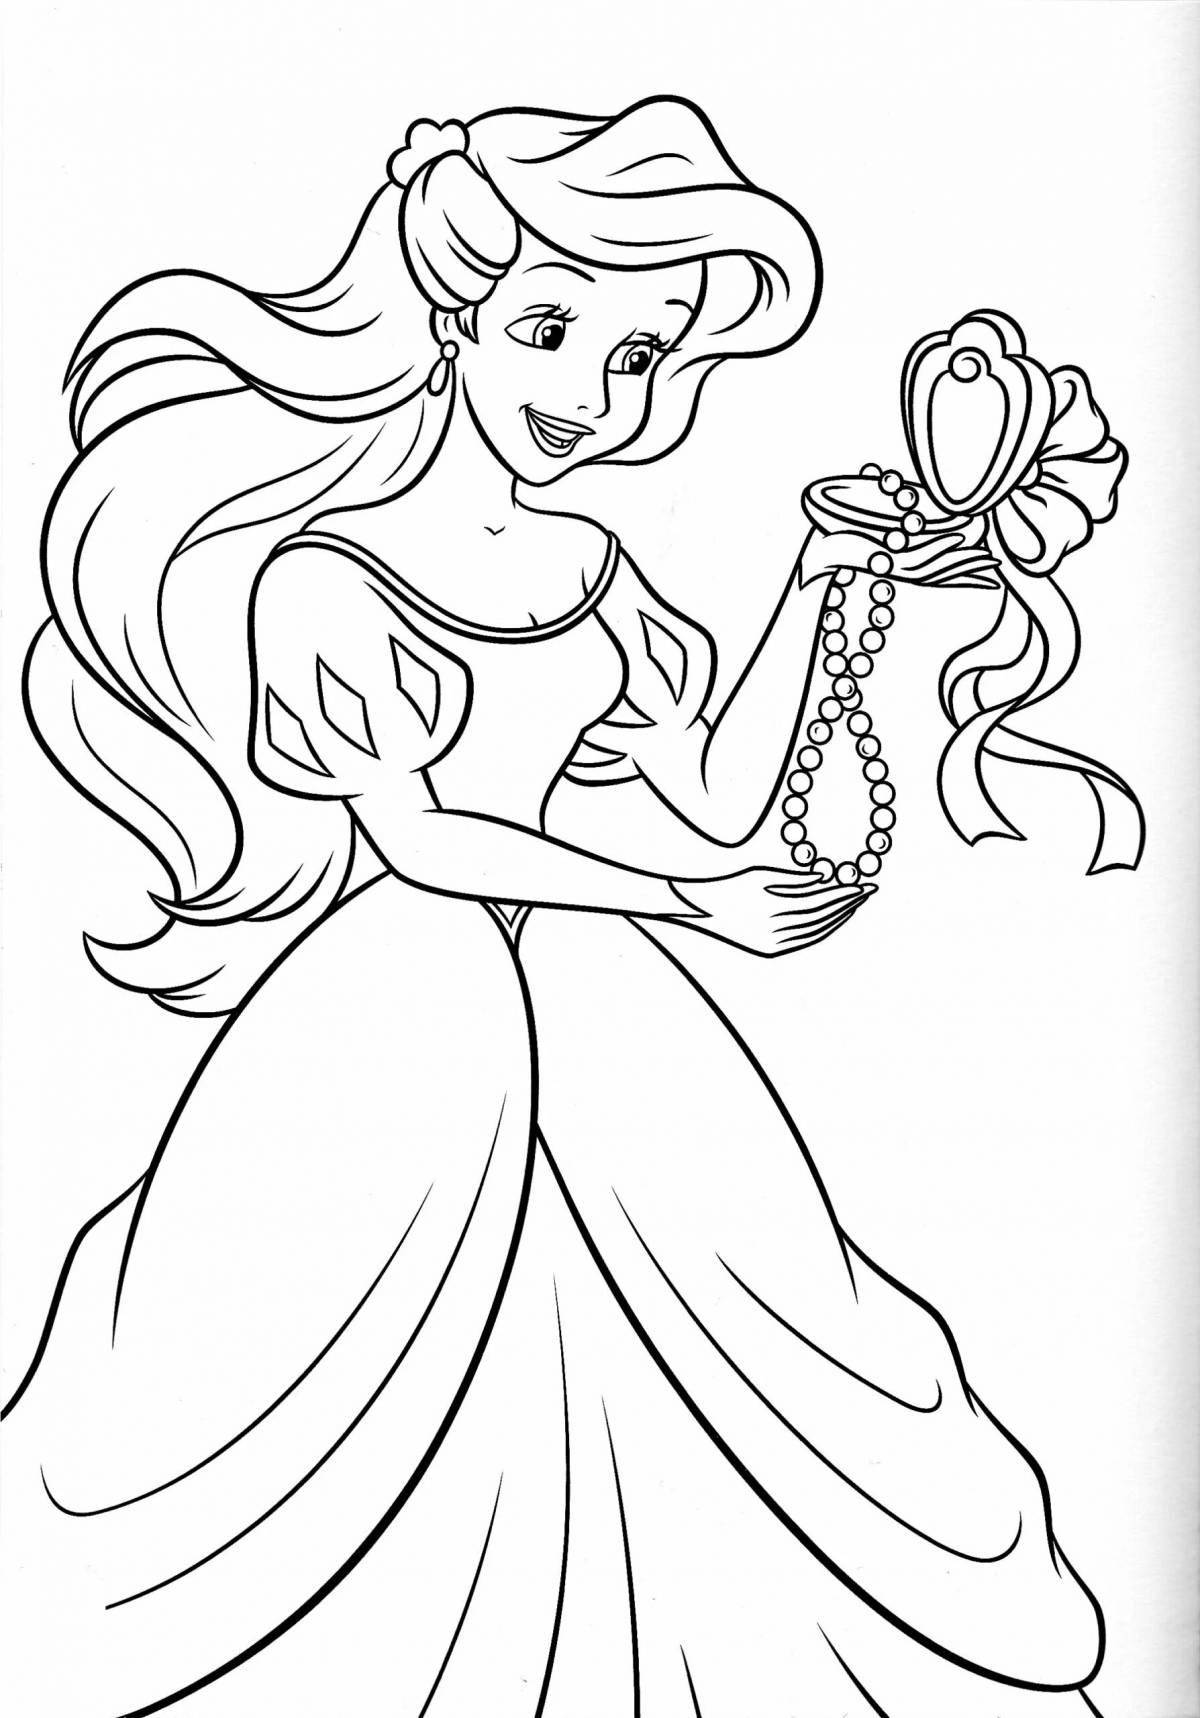 Dazzling princess coloring pages for girls 4-5 years old